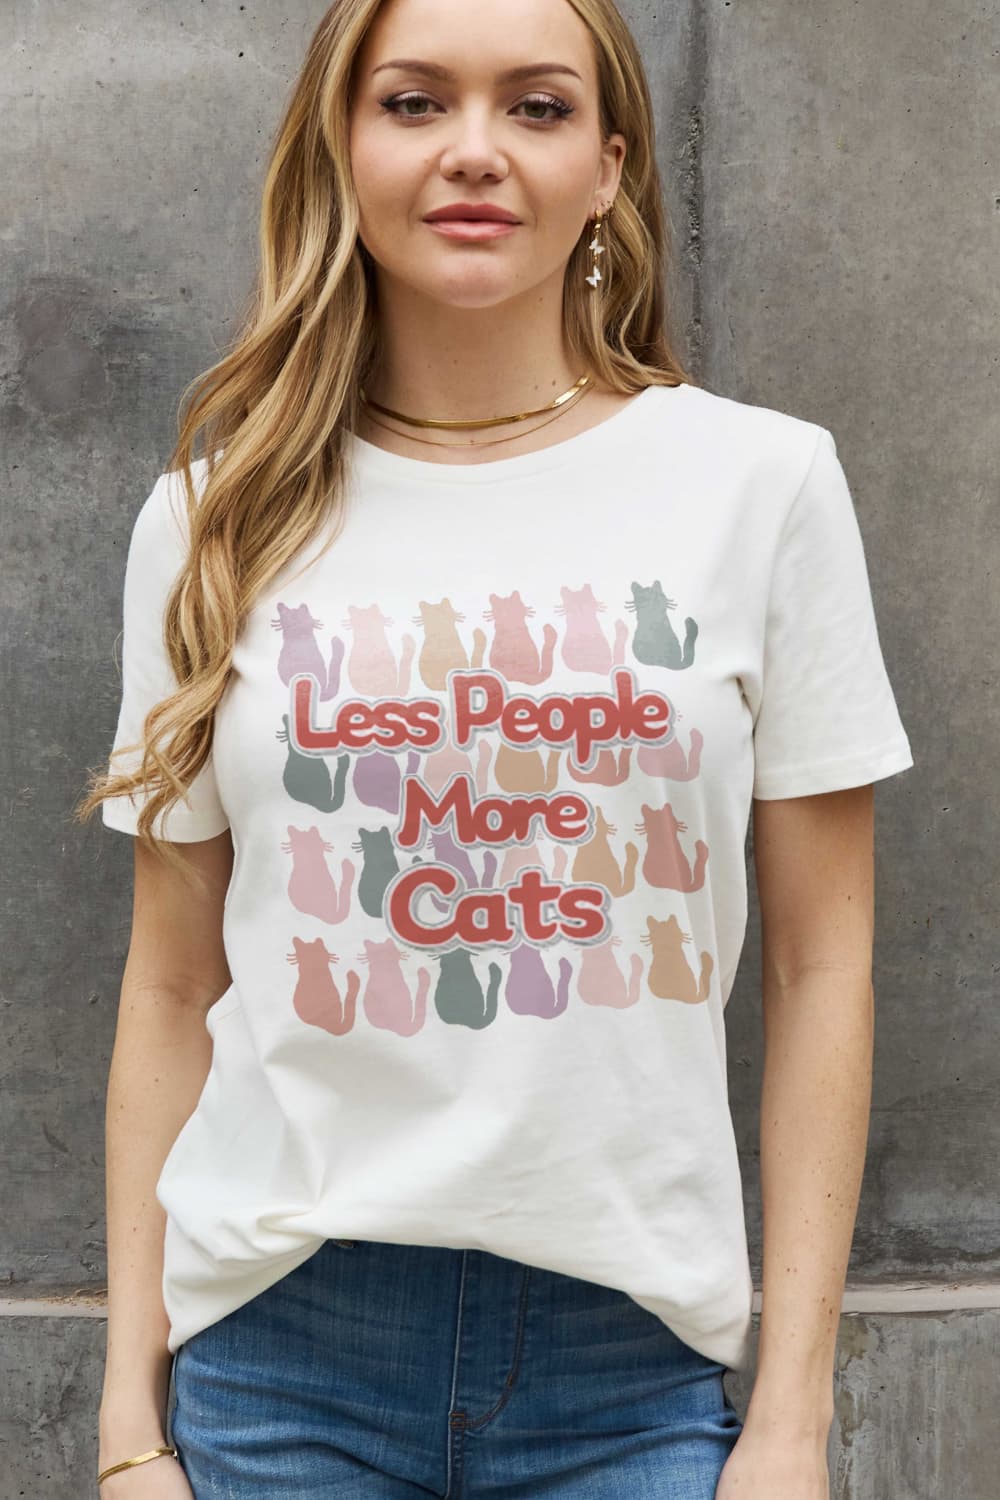 Trendsi Bleach / S Simply Love Full Size LESS PEOPLE MORE CATS Graphic Cotton Tee